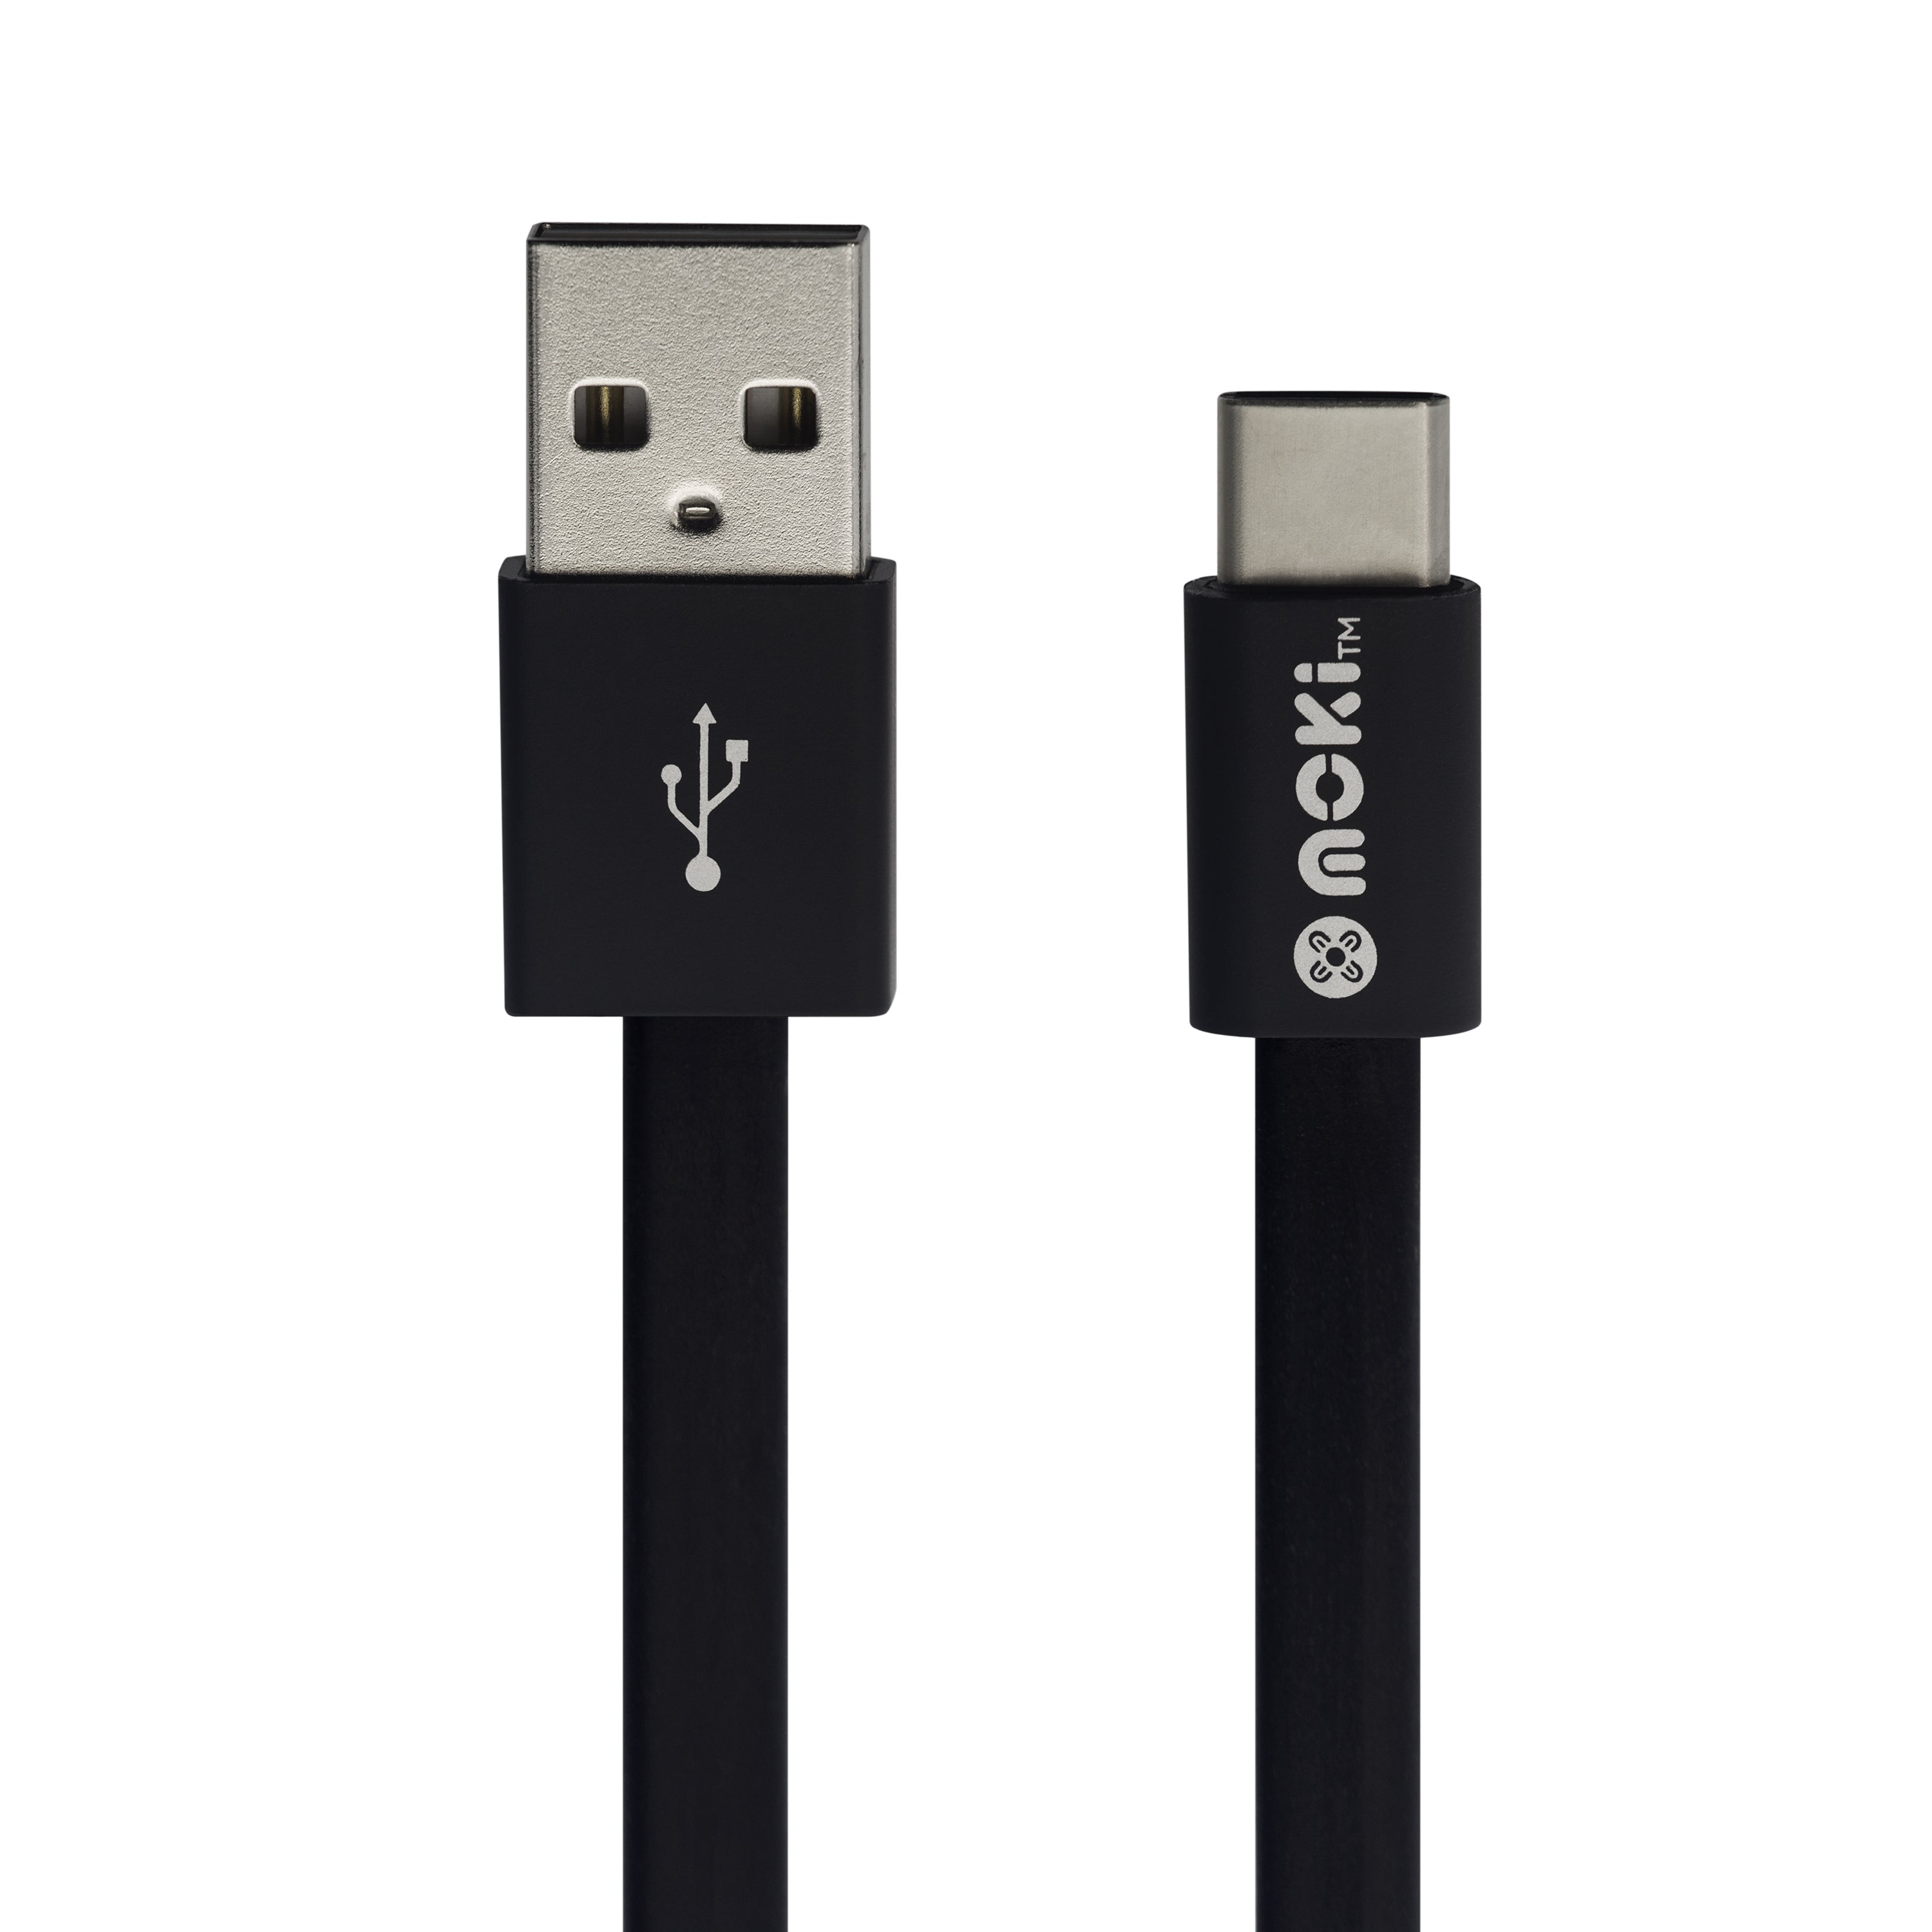 Type-C to USB SynCharge Cable